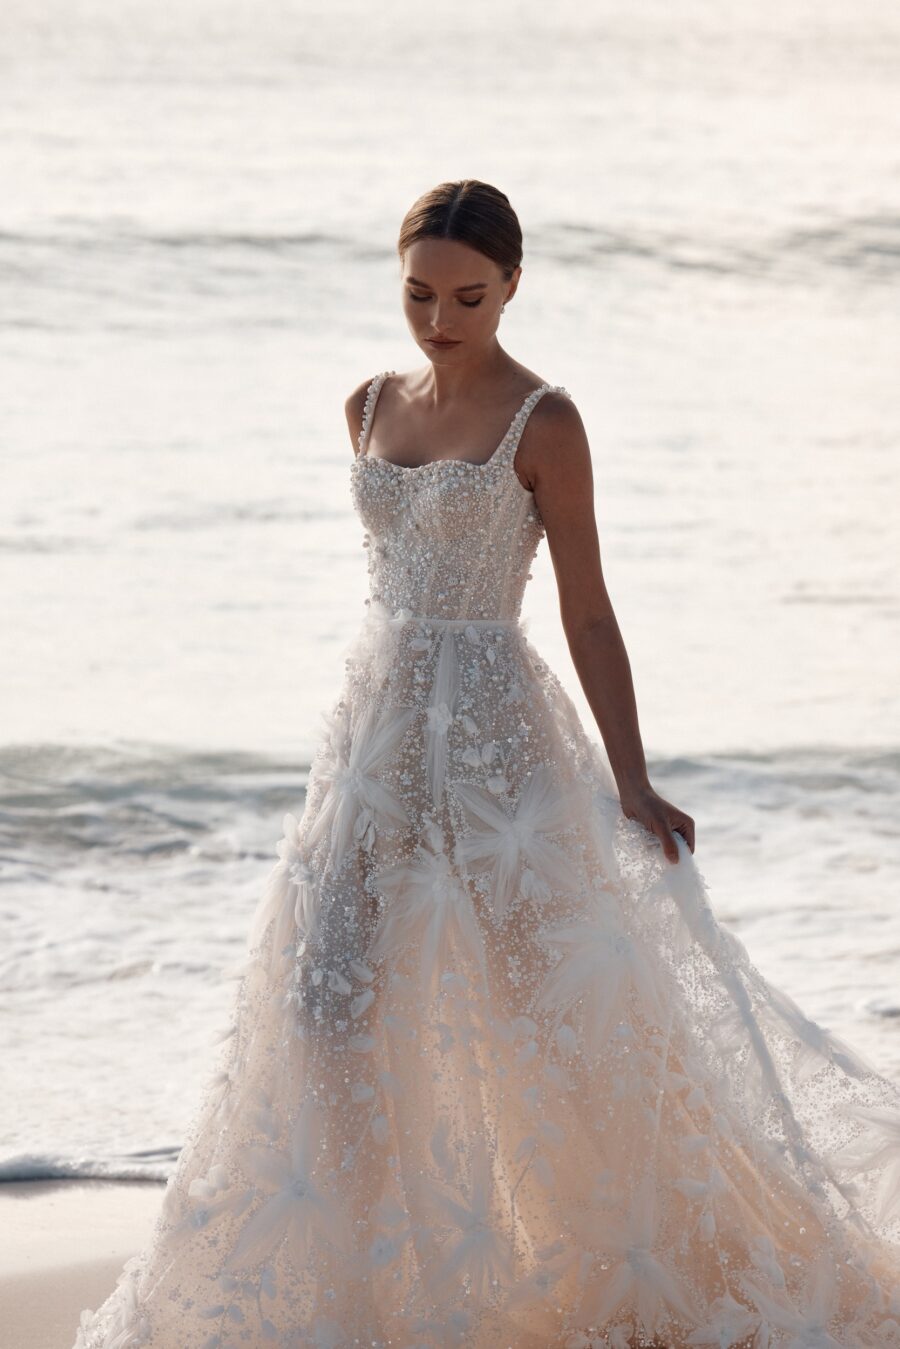 Thelma 9 wedding dress by woná concept from atelier signature collection